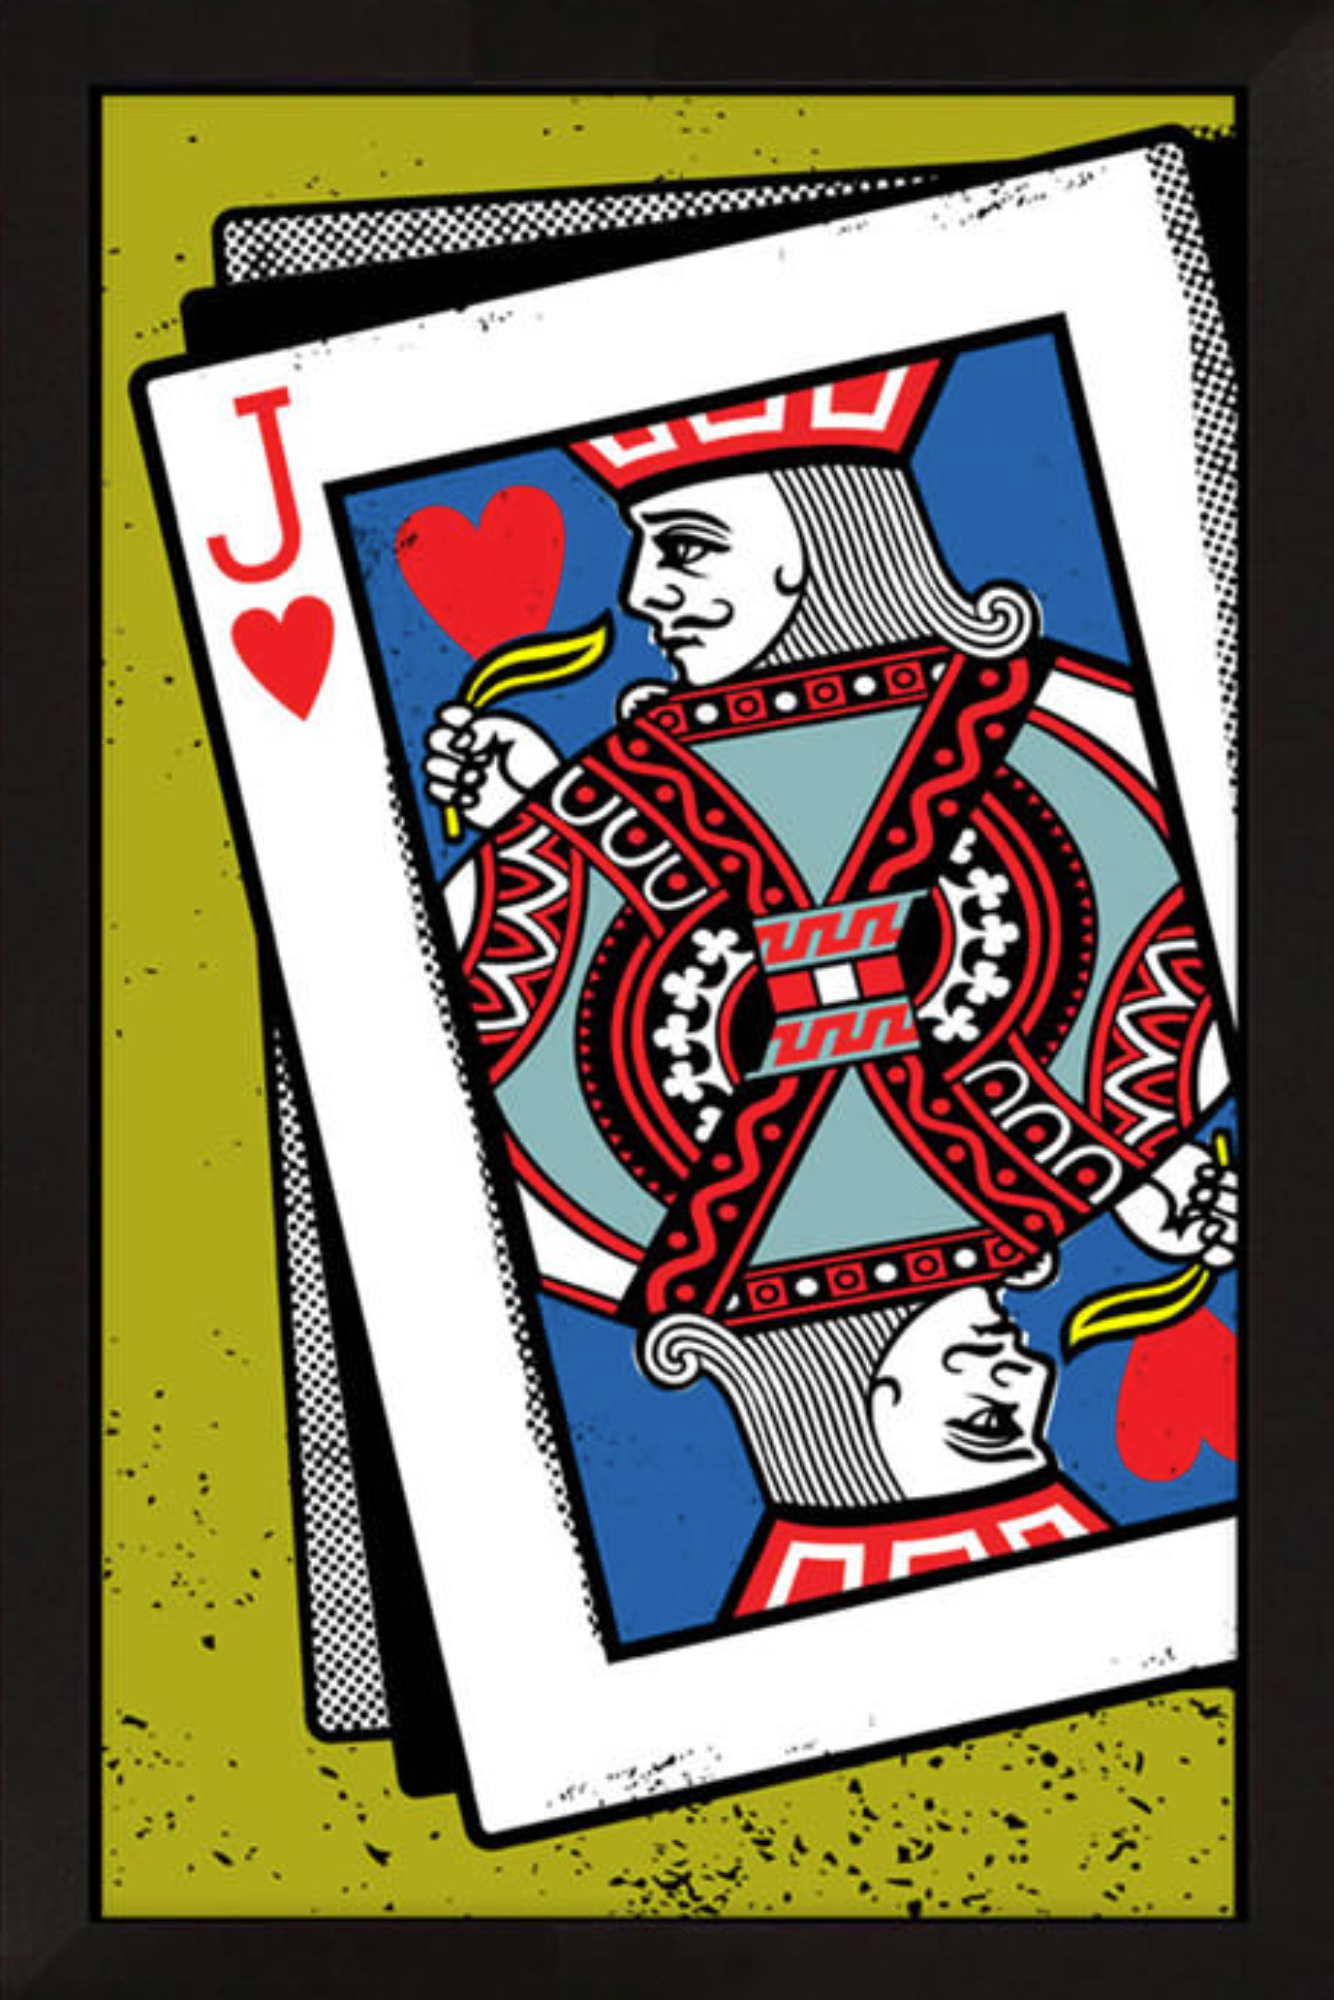 Jack of Hearts Framed Artwork in Modern Style with Textured Details and Bold Colors